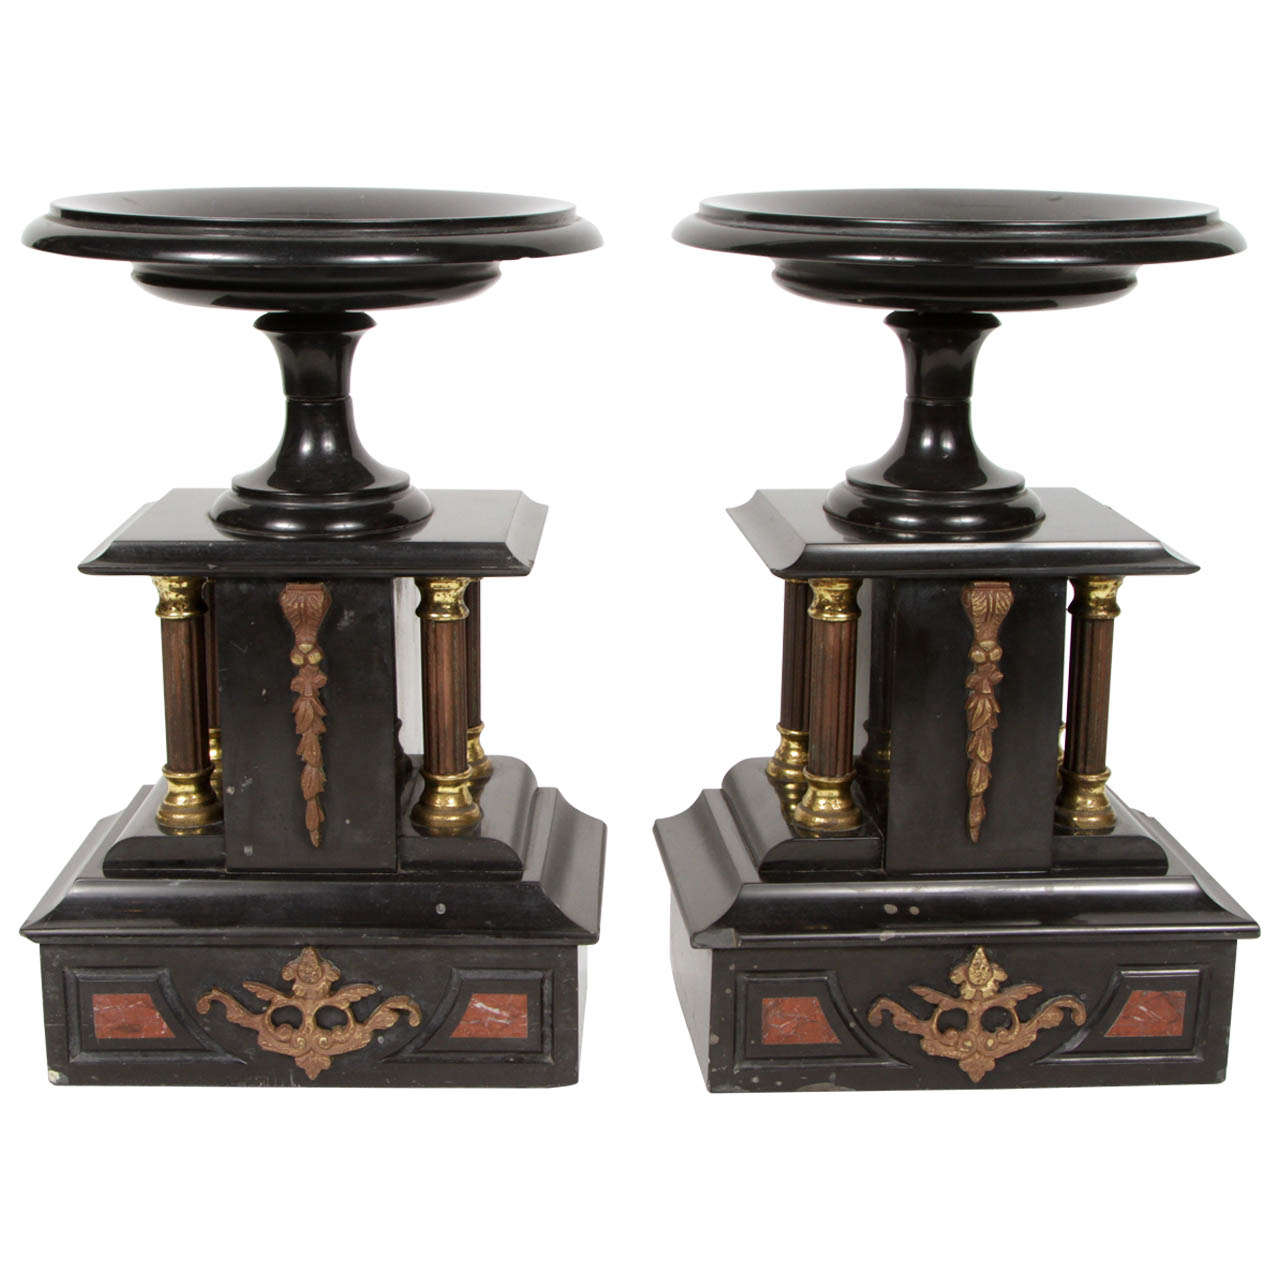 Pair of Marble and Metal Pedestal Stands